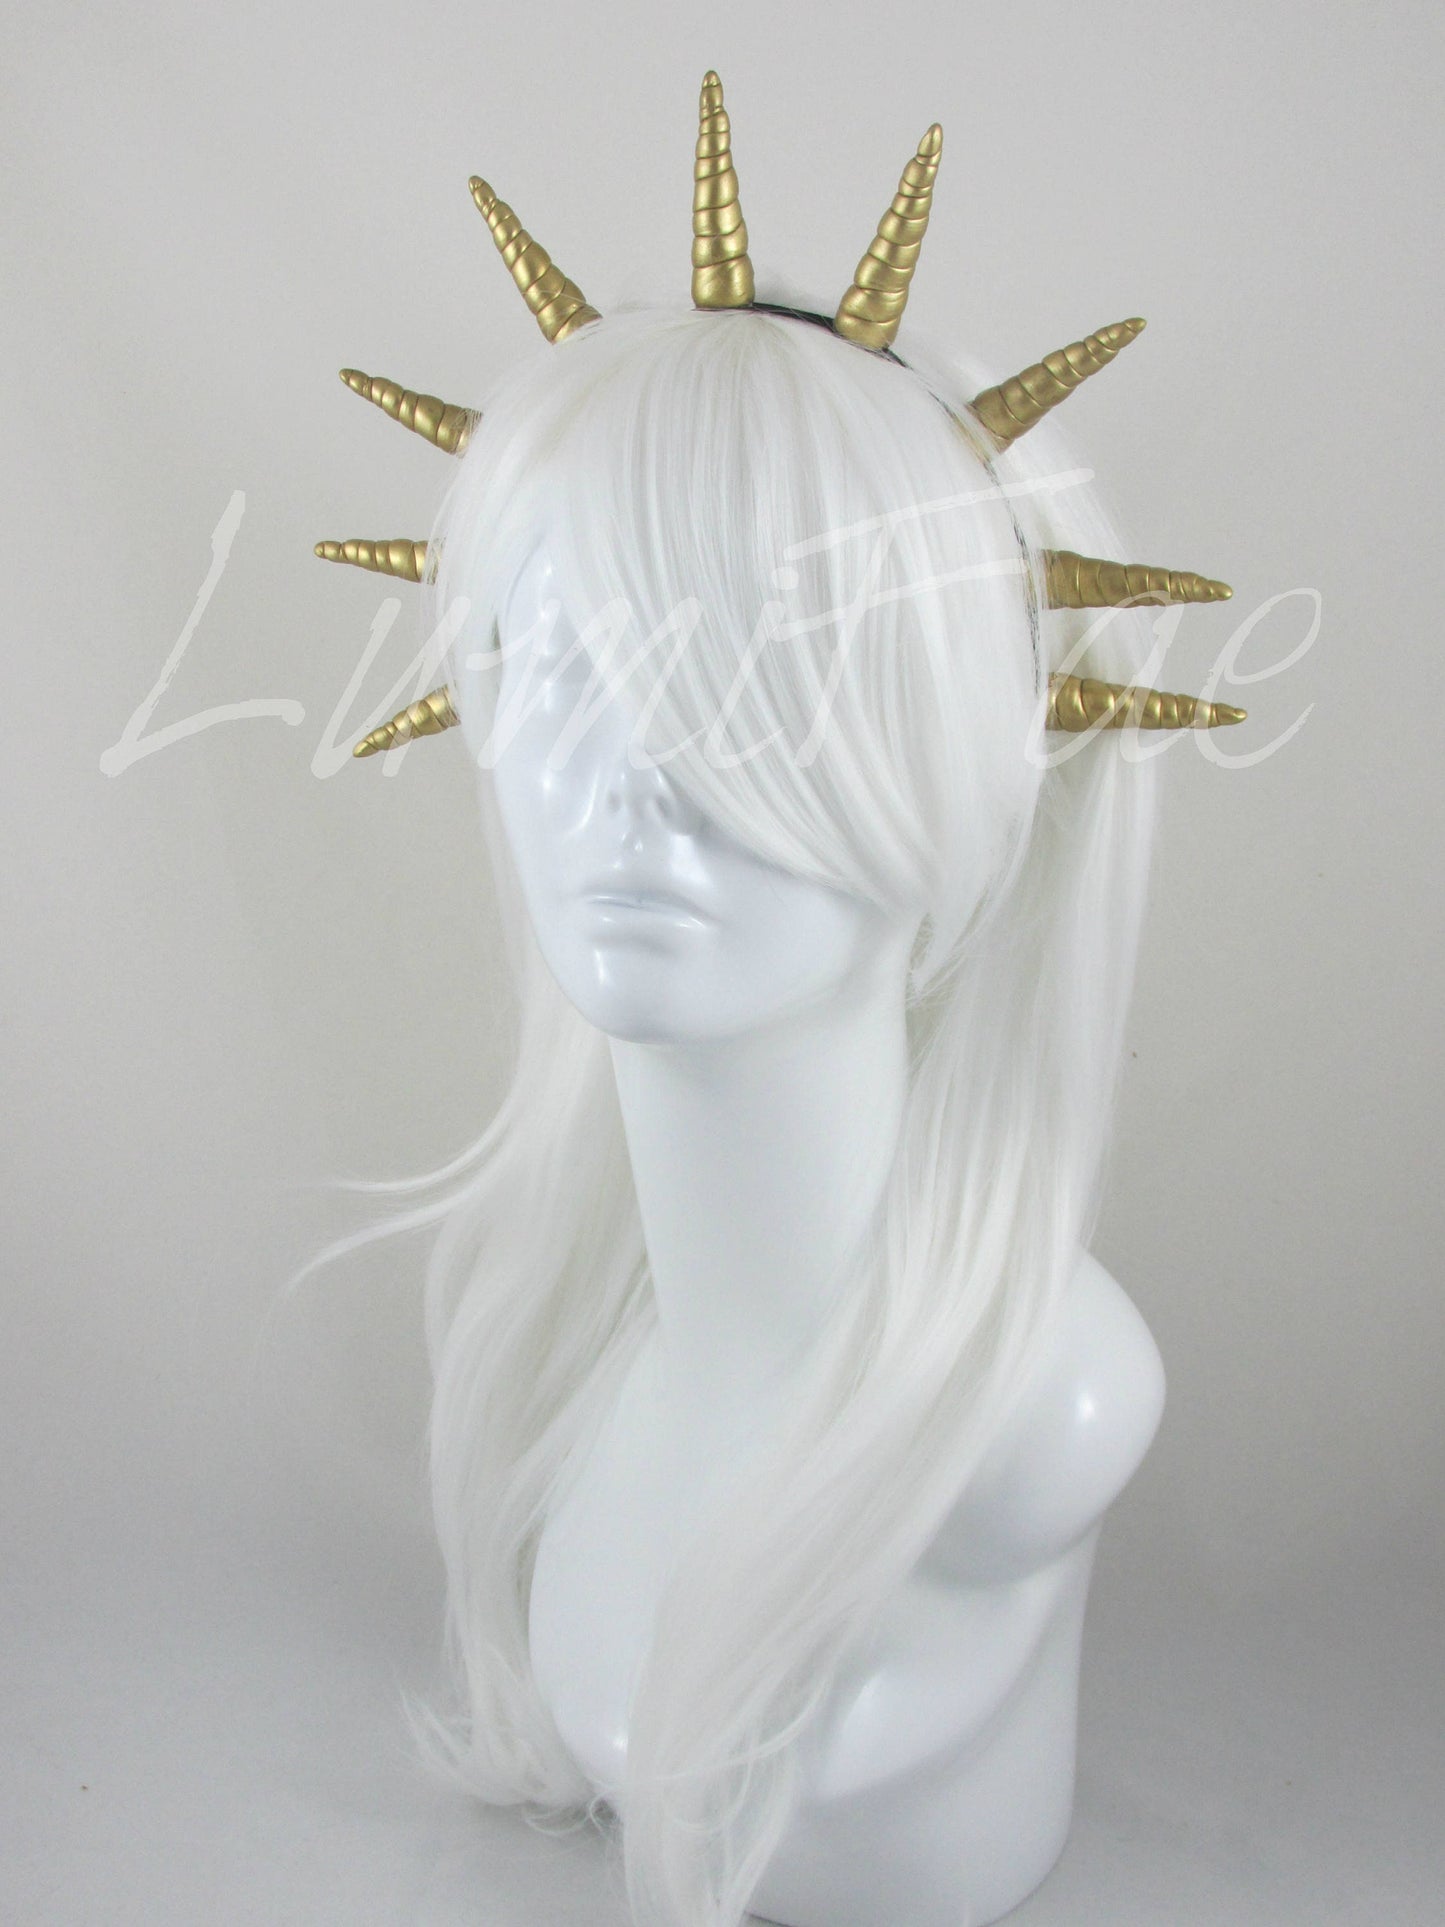 Mermaid Crown, Silver, Gold, or Copper